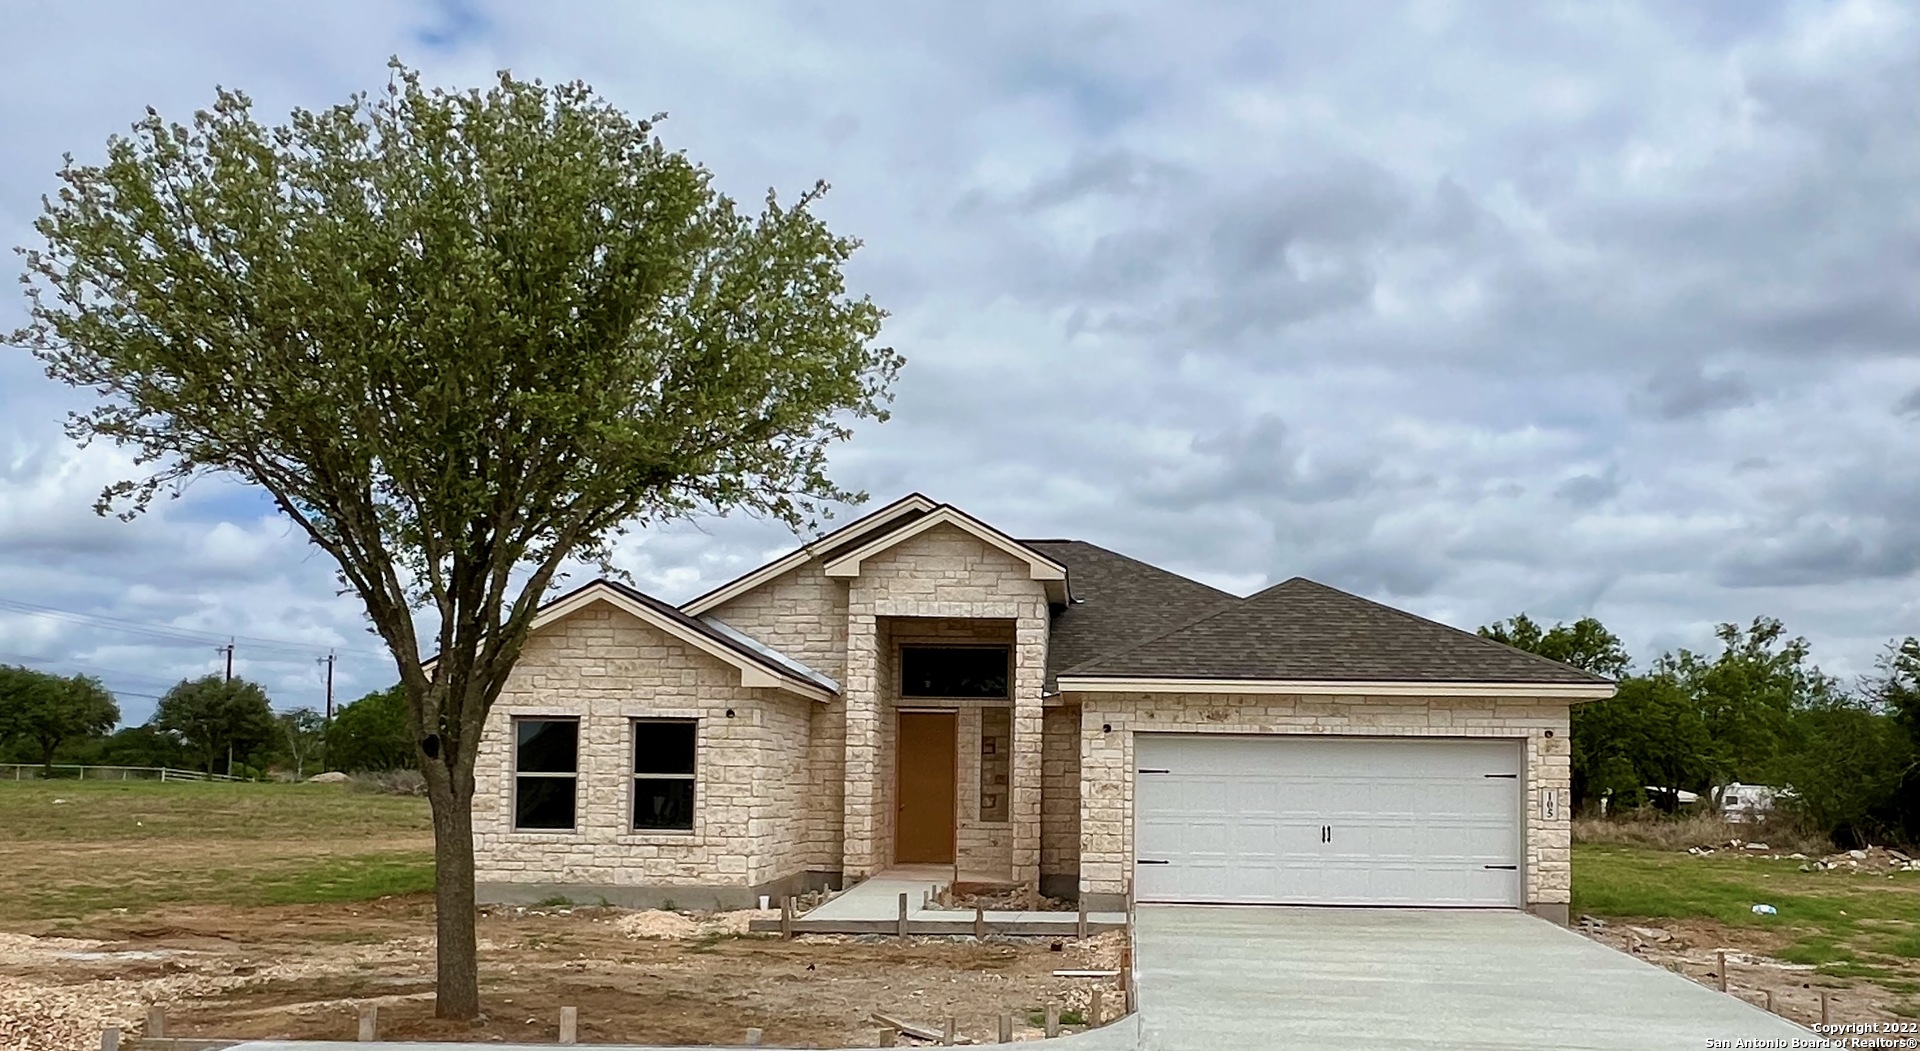 Beautiful New home in The Granberg on a .75 Ac.  This home has 3 Bedroom and 3 bathrooms with no steps and no carpet all tile. High ceilings and abundant light. Master suite with large walk-in closet and walk in shower. Nicely sized kitchen with solid countertops & stainless steel appliances.